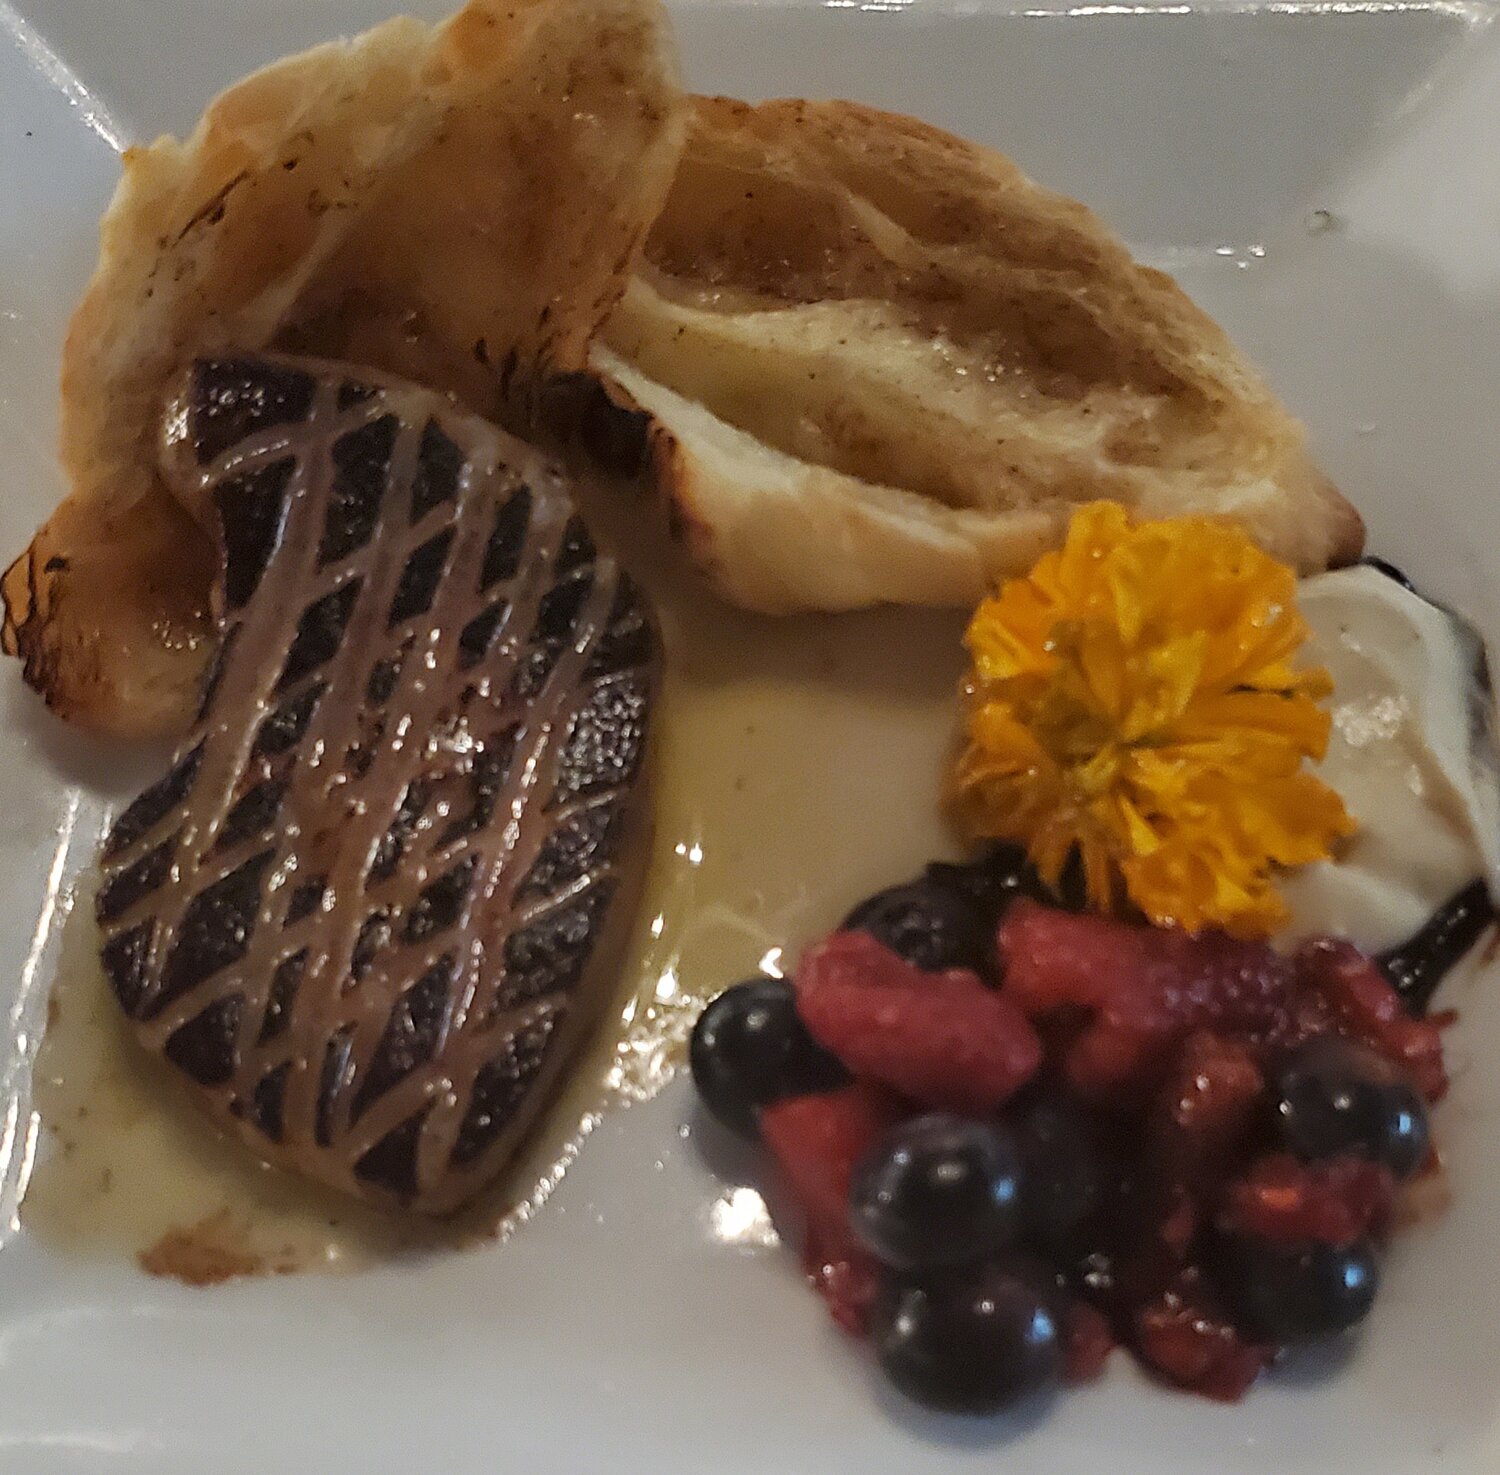 Foie Gras en Croissant — Apple bourbon butter, macerated berries, earl grey anglaise, mission fig balsamic